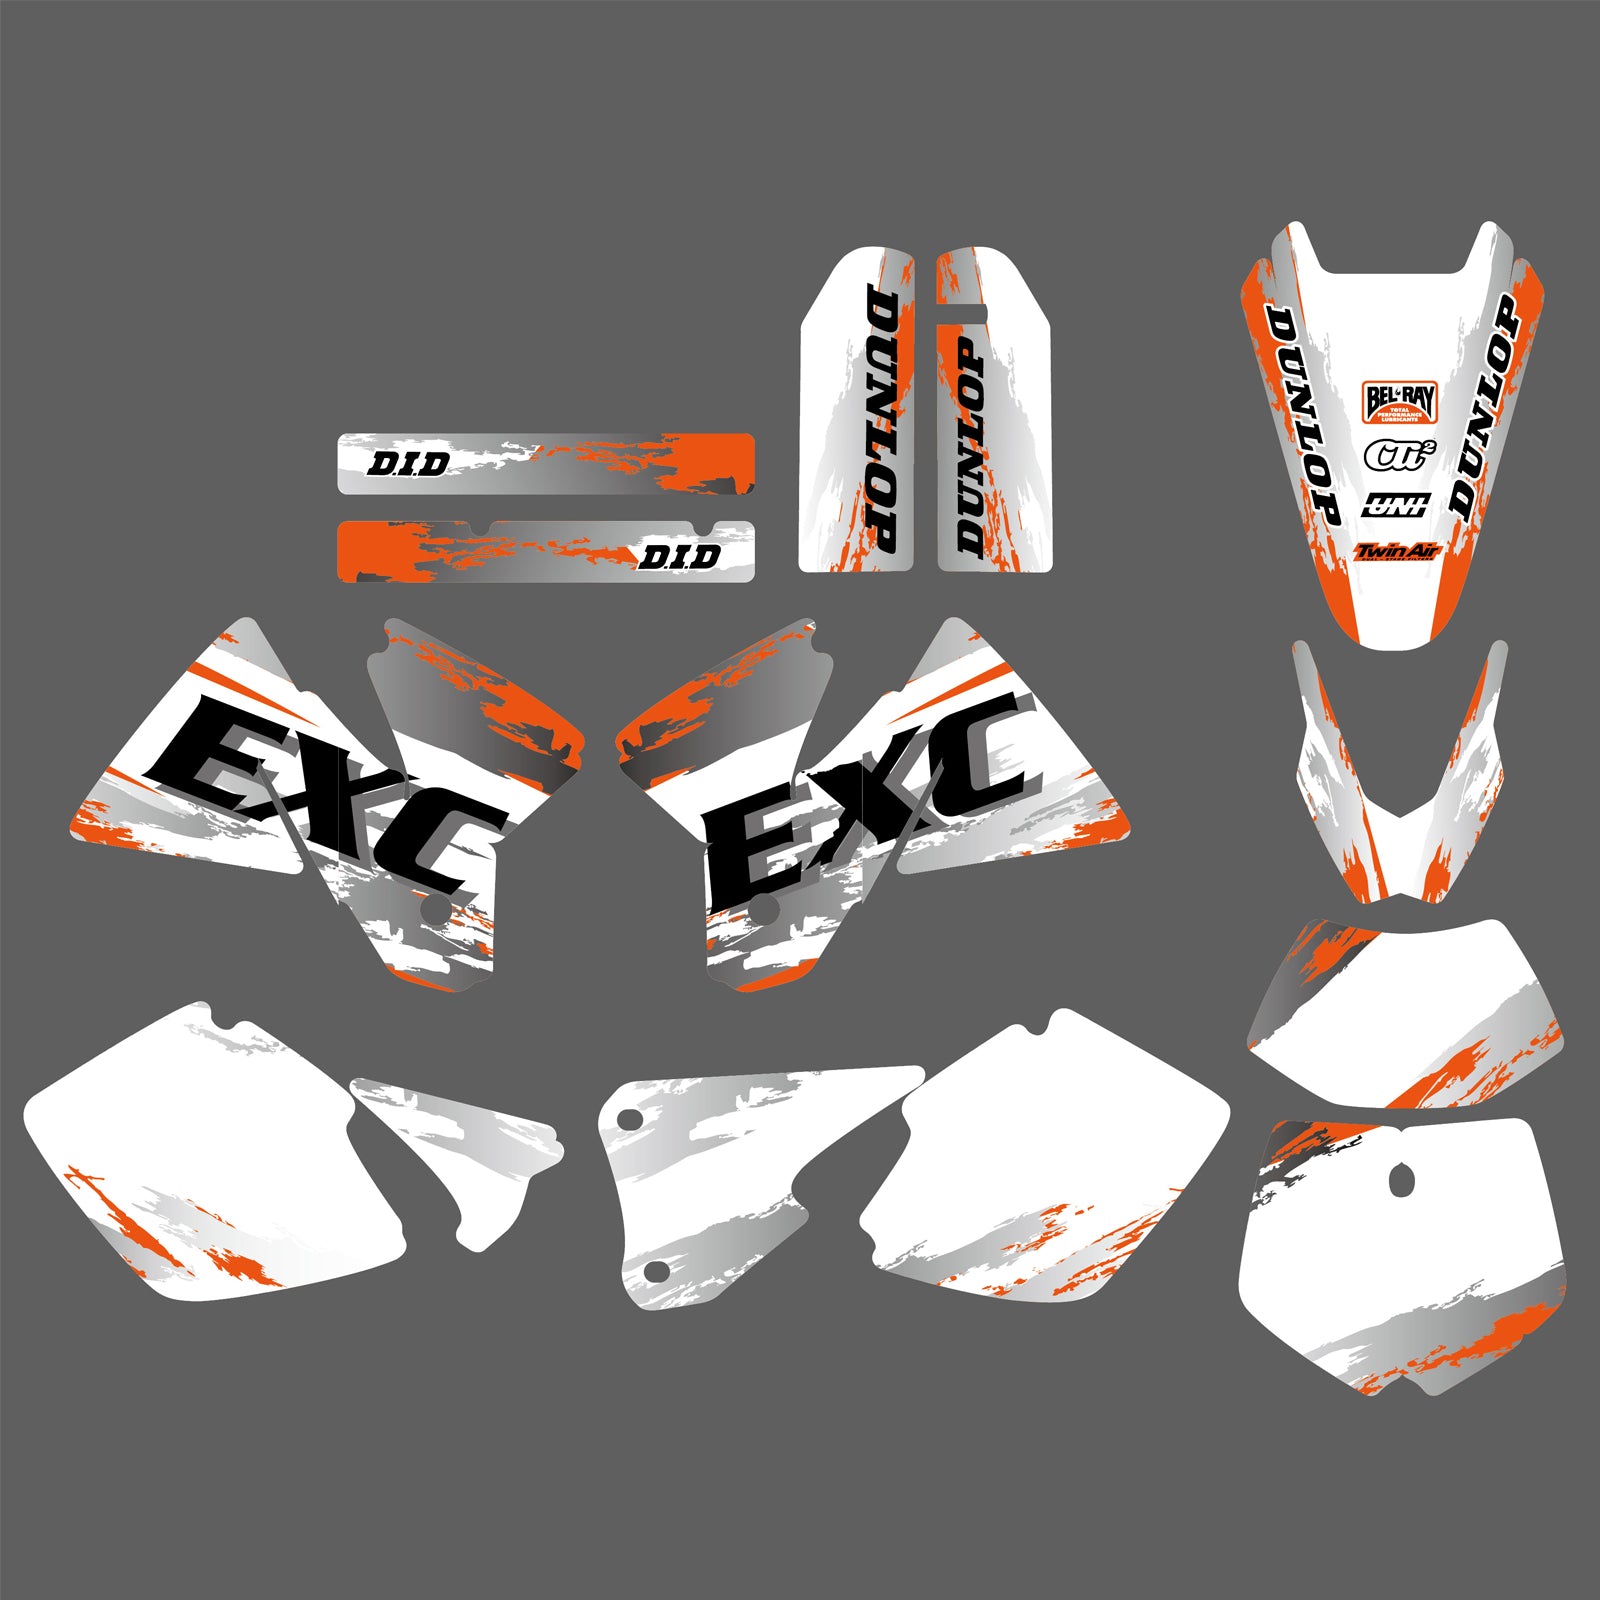 Motorcycle Graphics Background Decals Protector Sticker For KTM 125-520 EXC 1998-2000